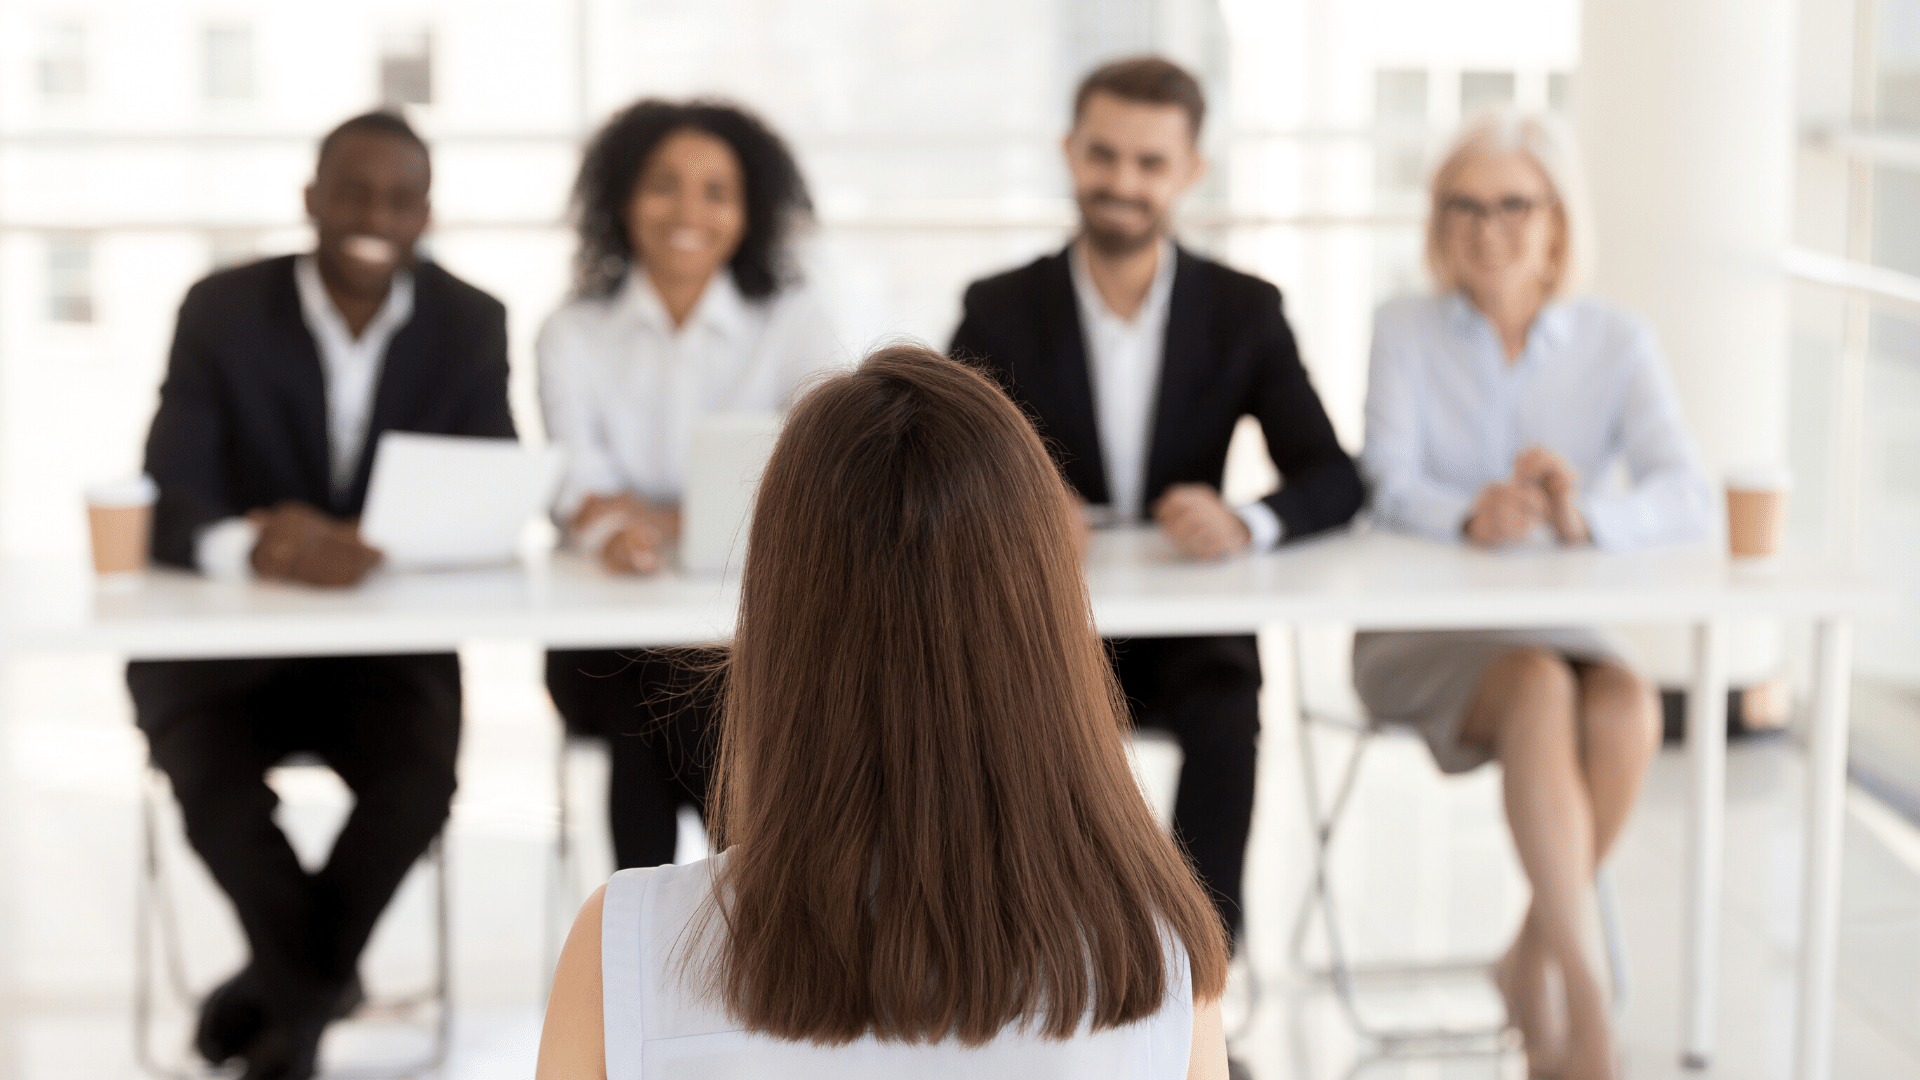 9 Job Interview Tips How To Set Yourself Up For Success And Land The Job